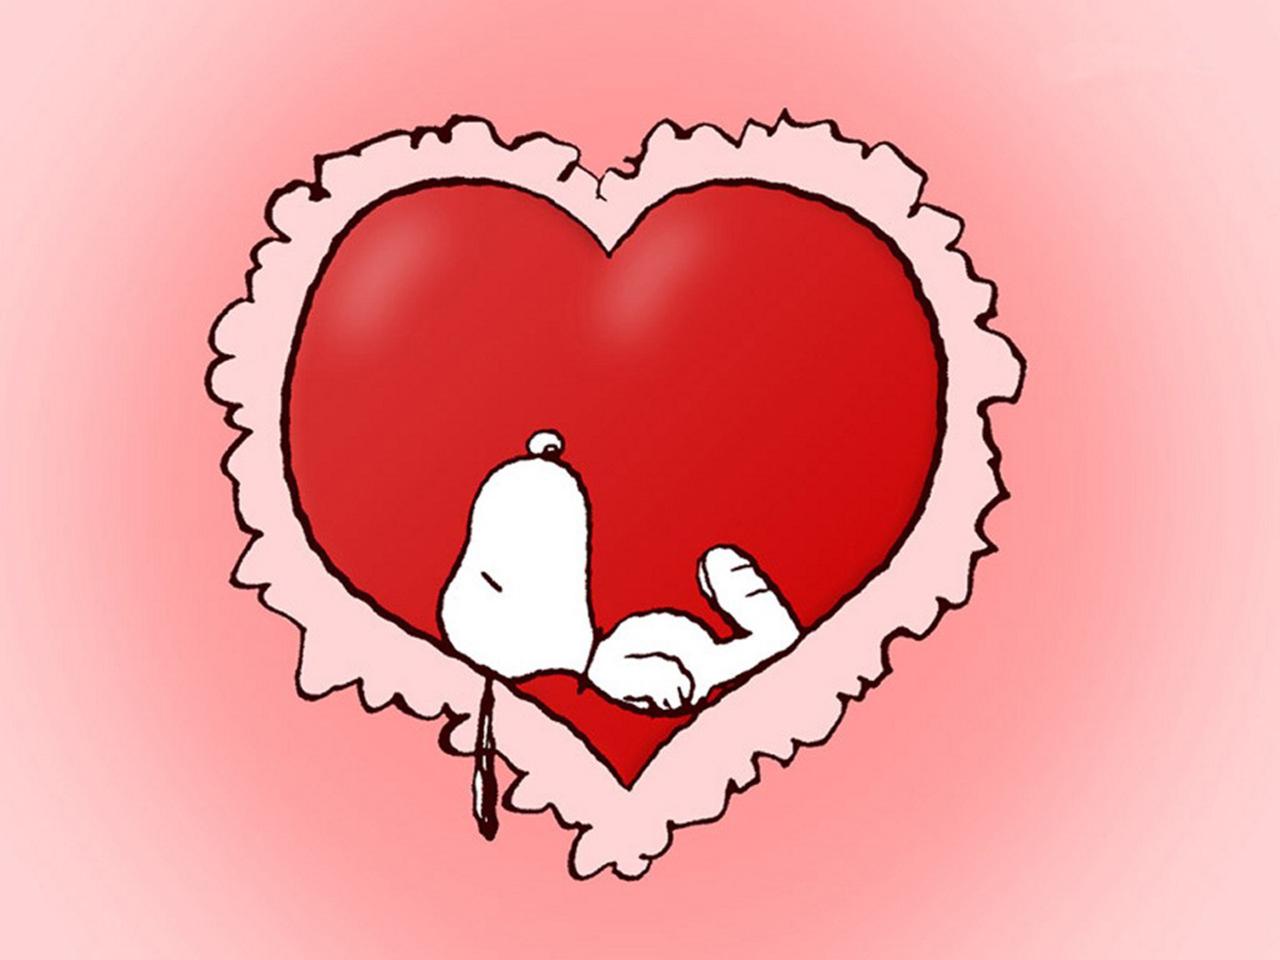 Snoopy Valentine Cartoon Full HD Background Image for Mac